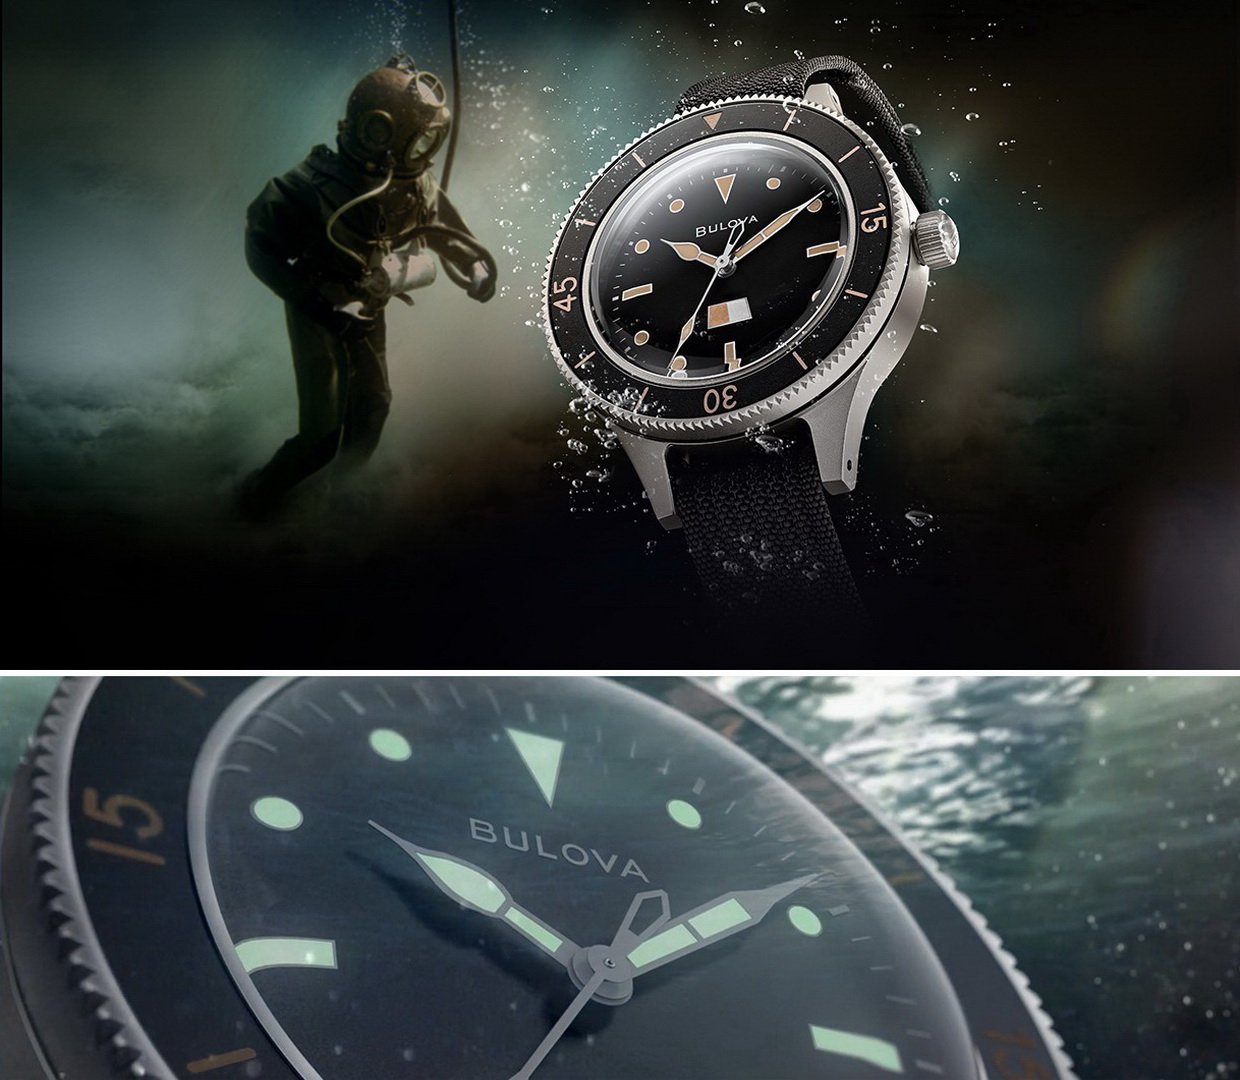 Bulova’s new MIL-SHIPS-W-2181 Submersible Re-Edition BULOVA%2BArchive%2BSeries%2BMIL-SHIPS-W-2181%2BSubmersible%2BRE-EDITION%2B01